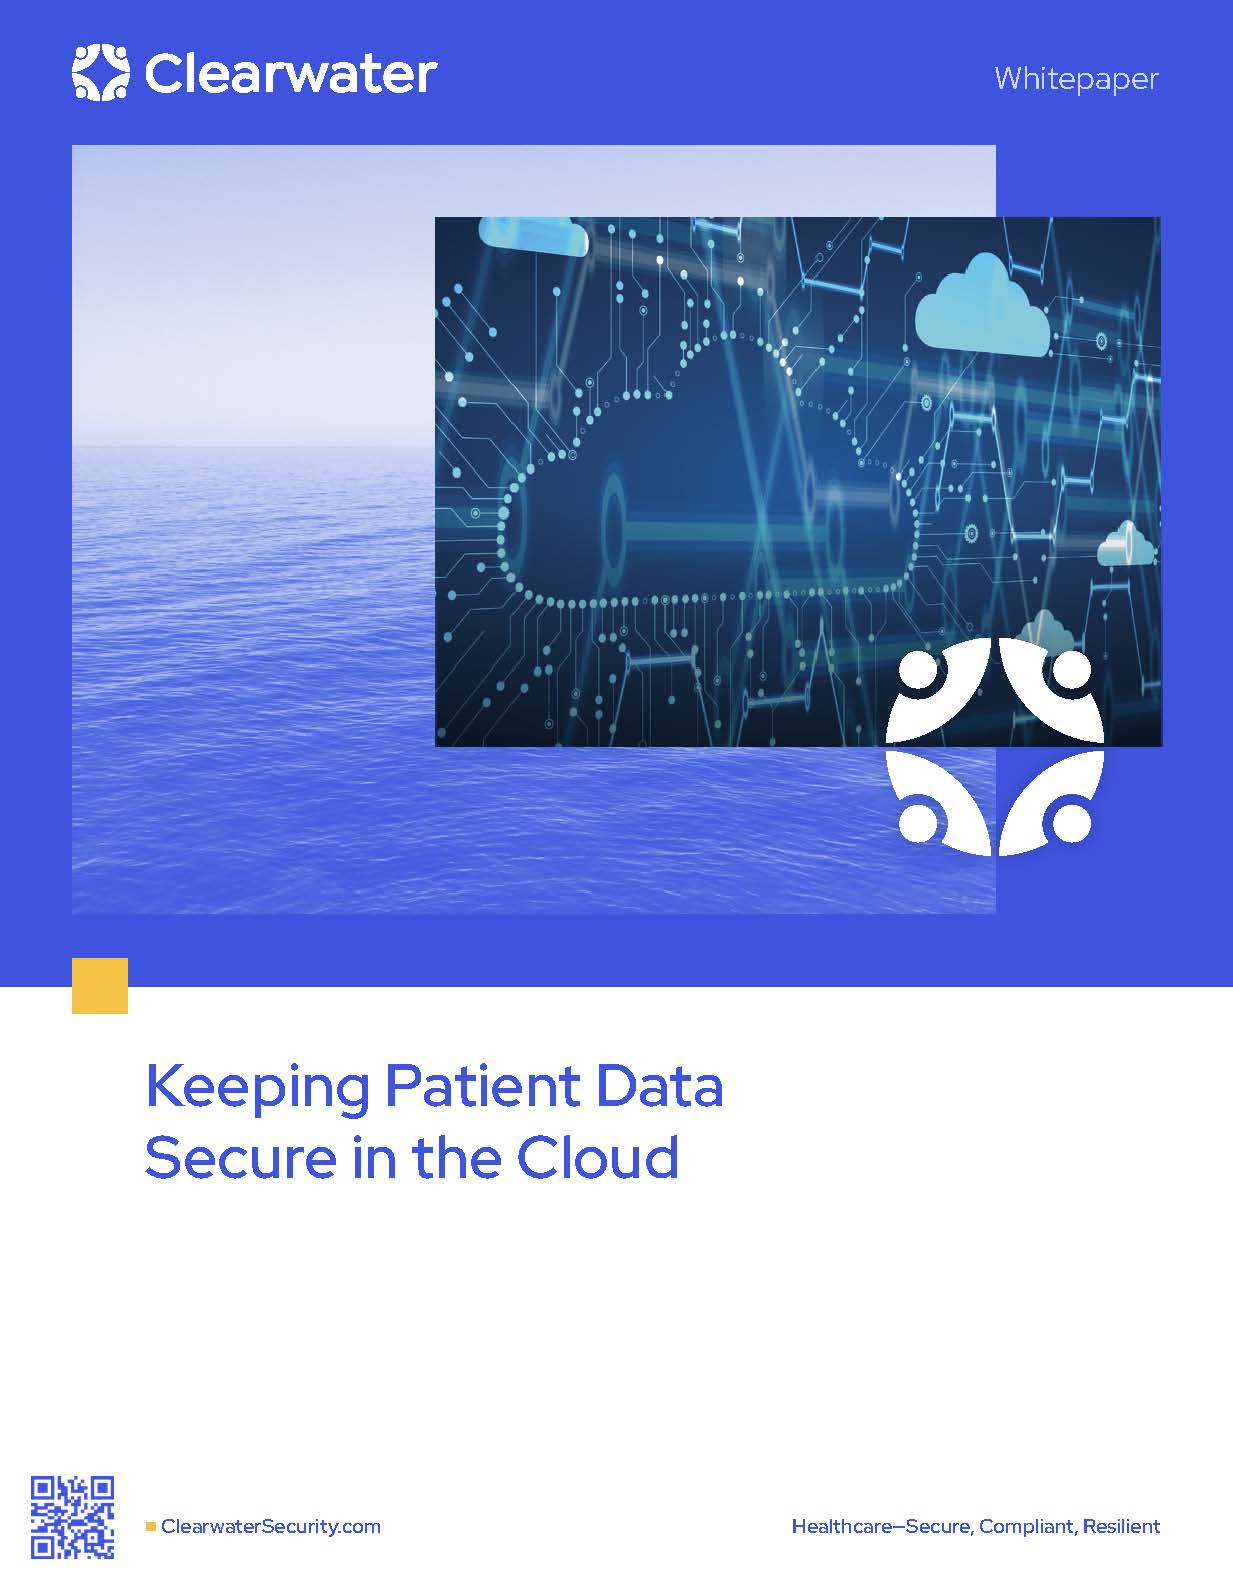 Keeping Patient Data Secure in the Cloud by Clearwater